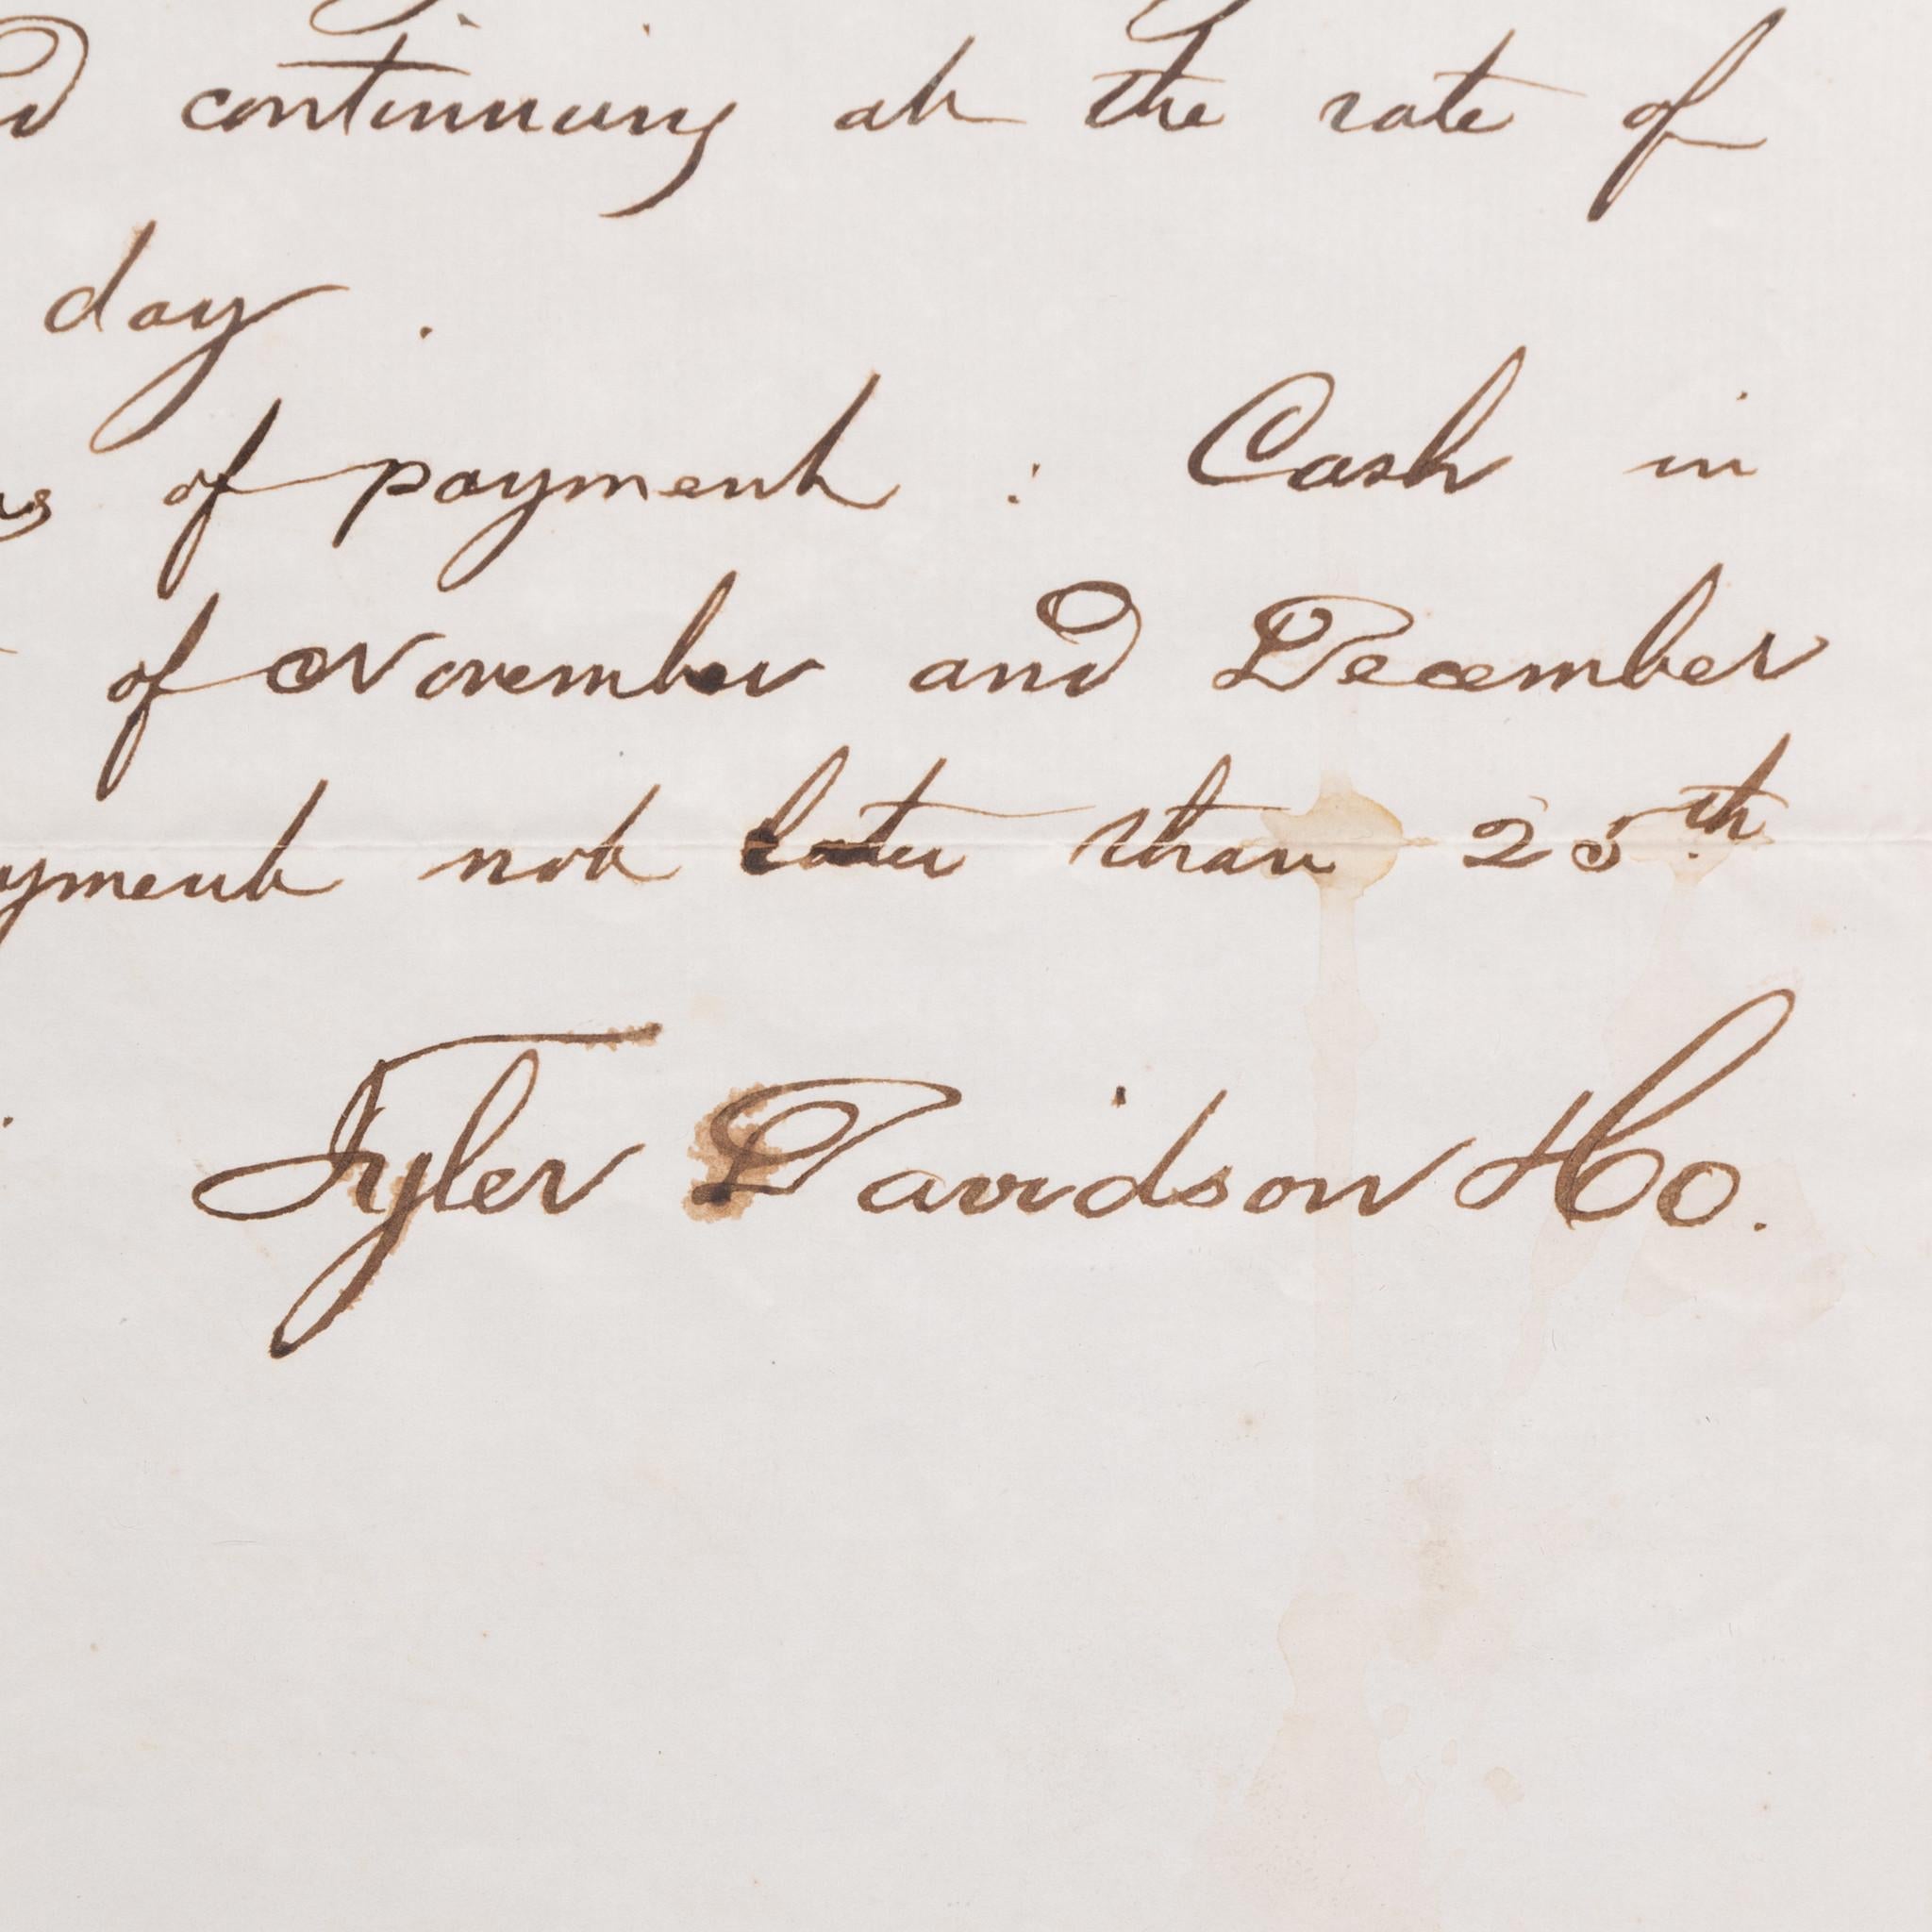 This handwritten (it appears with quill) letter was addressed to the Governor of the state of Ohio in 1861- the beginning of the Civil War. Tyler Davidson, one of the major Colt distributors, is offering the Ohio Militia one to two thousand Colt